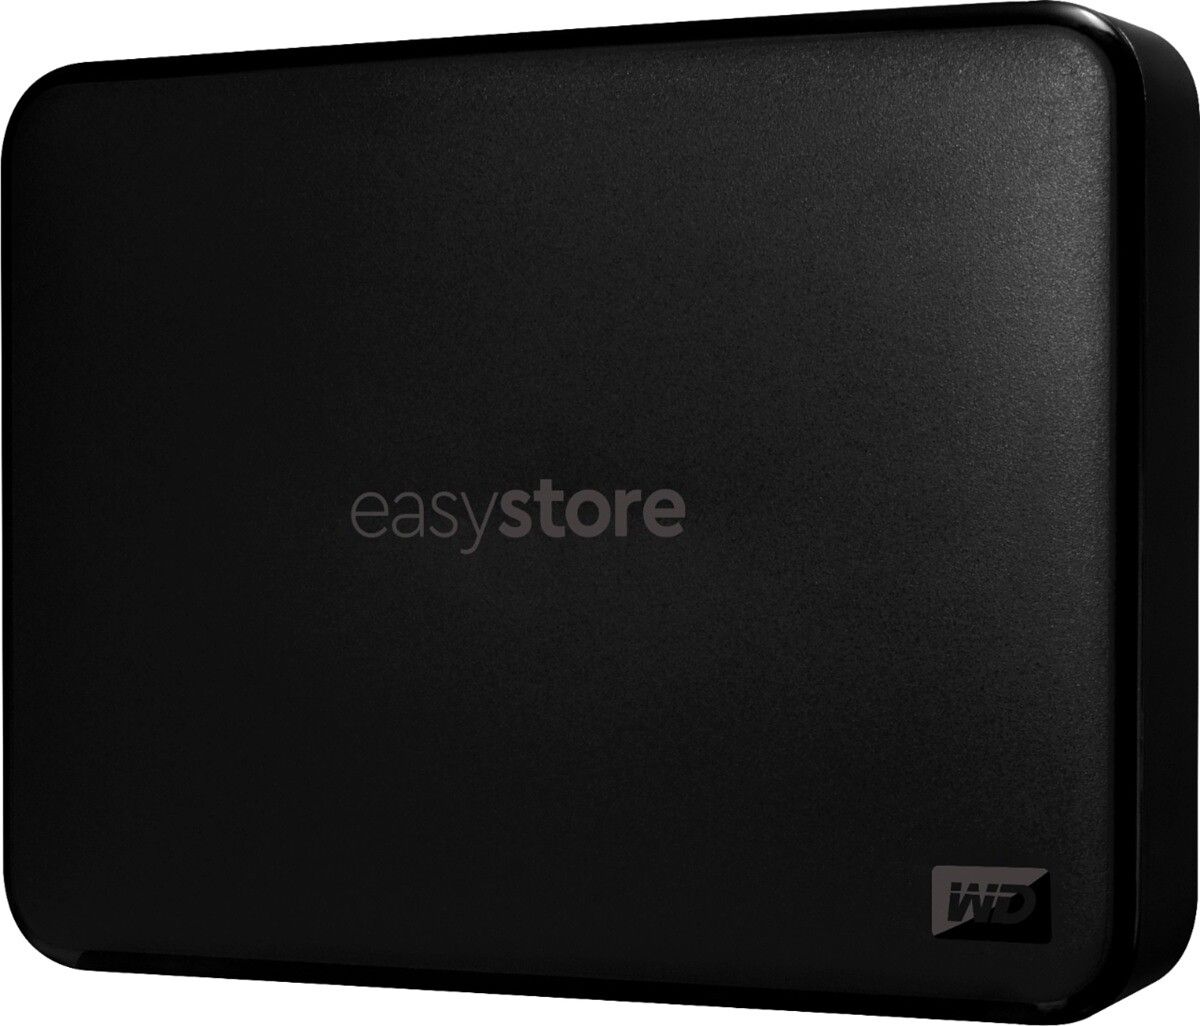 Save big on a really big external hard drive! The WD easy store 5TB hard drive is just $90, and you can backup all of your files, from all of your devices. This much storage from a trusted company for less than $100? You really can't beat that price.